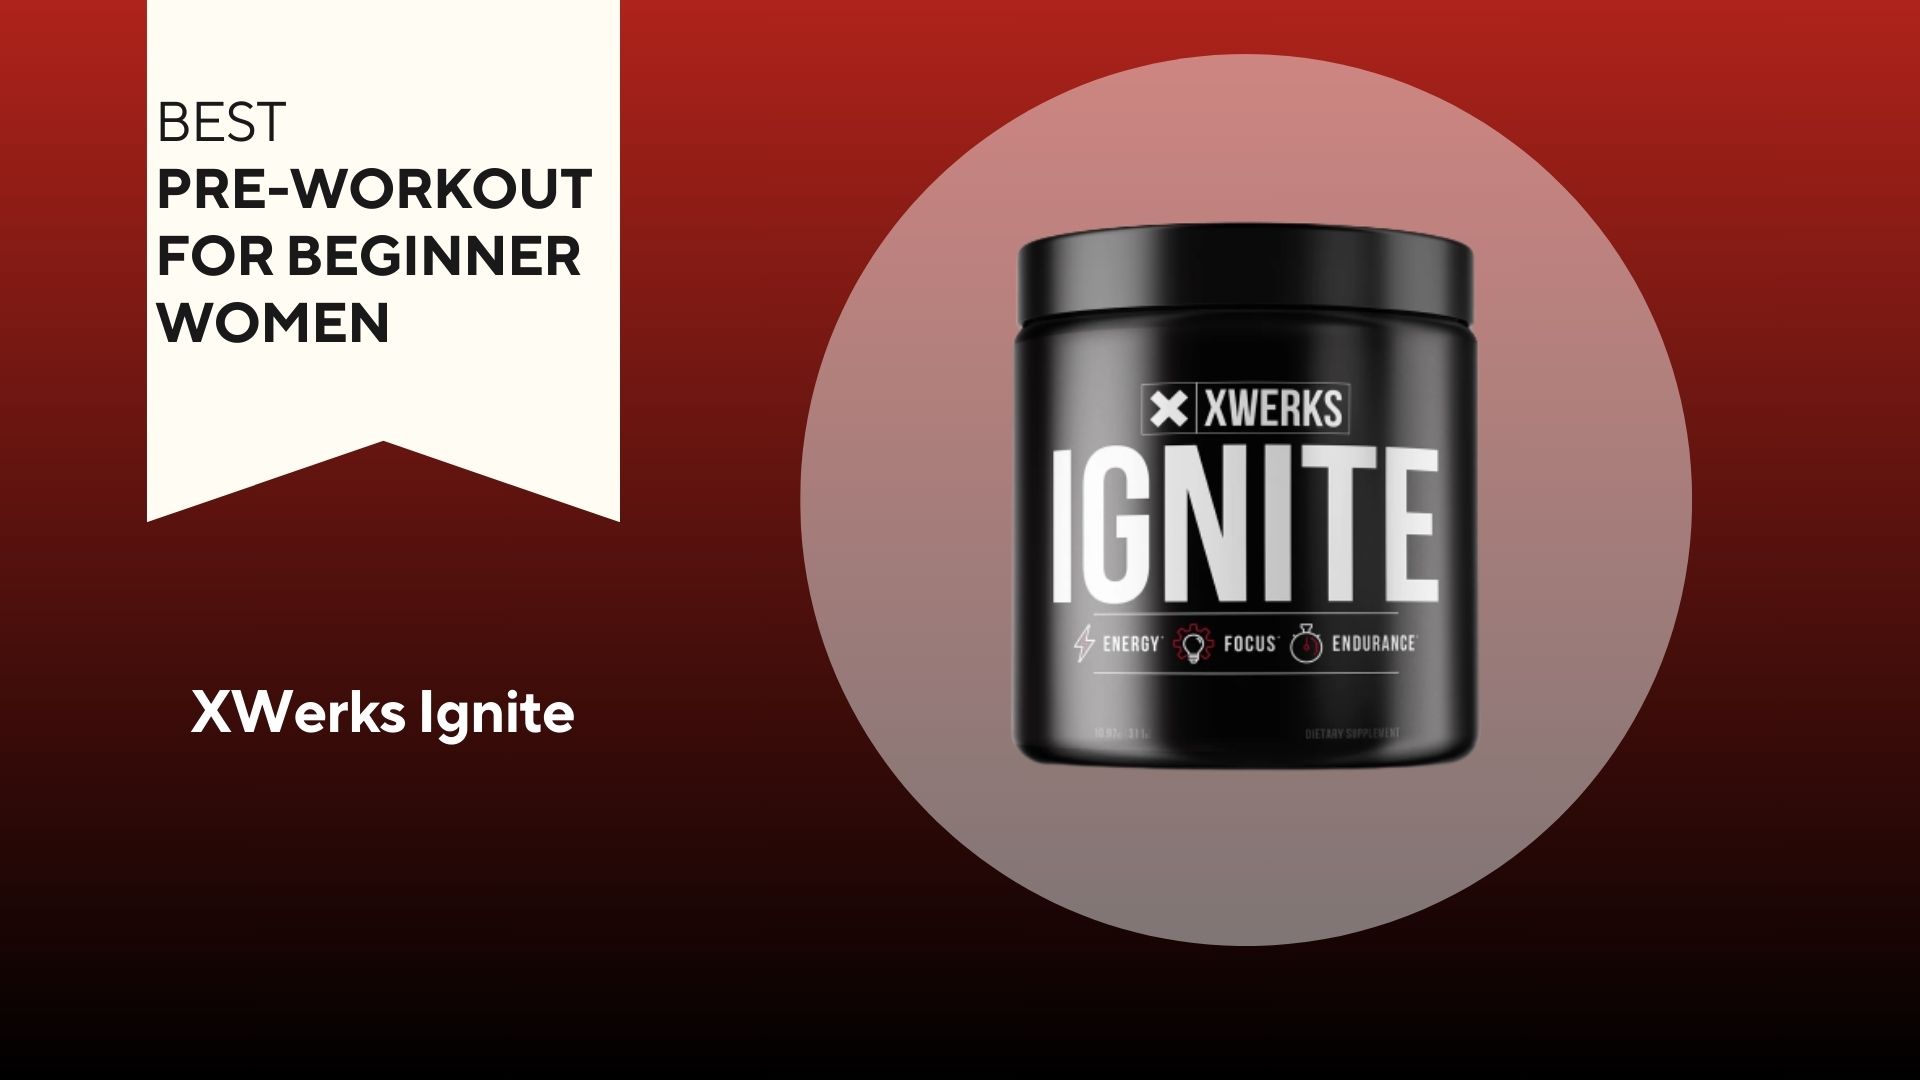 A red background with a white banner that says, "Best Pre-Workout for Beginner Women" next to a black container that says XWerks Ignite in white font